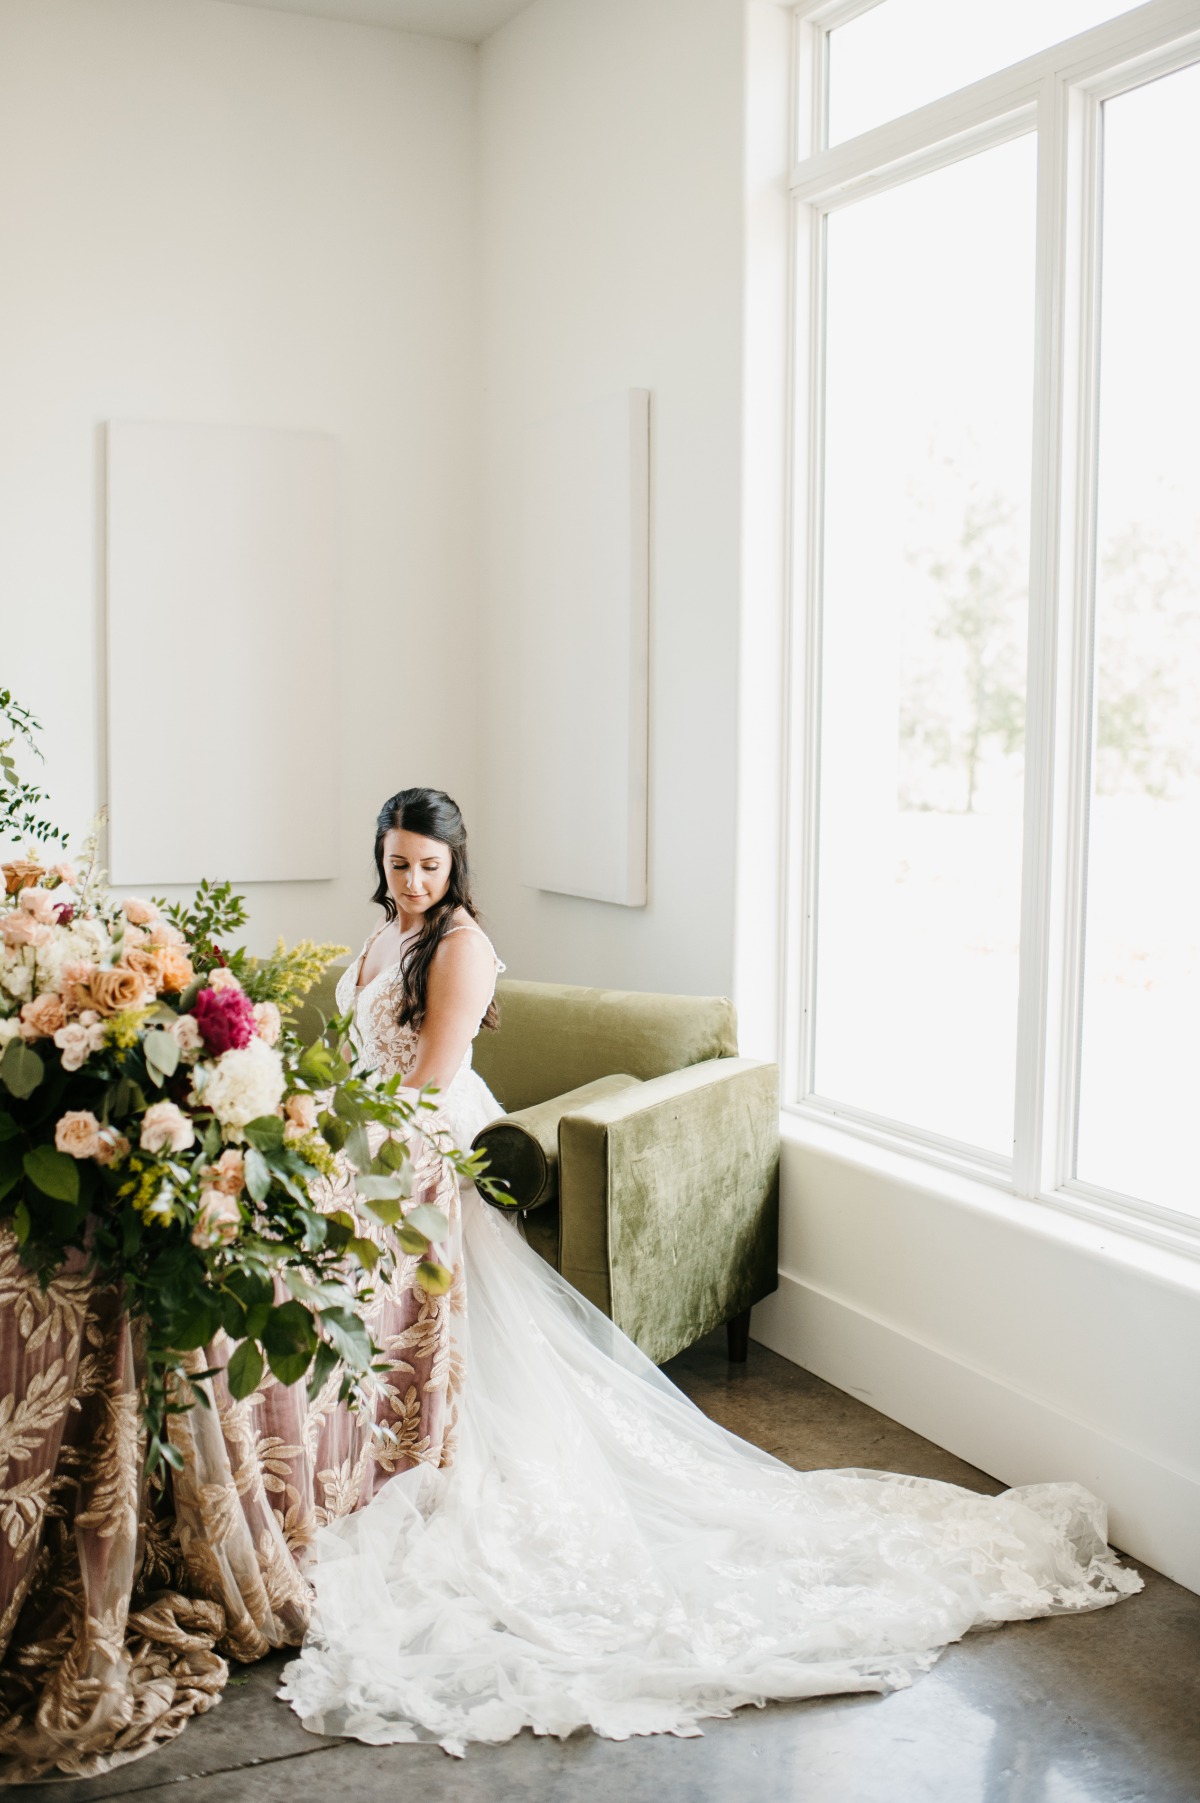 The 3 Key Pieces To A Successful Wedding Design